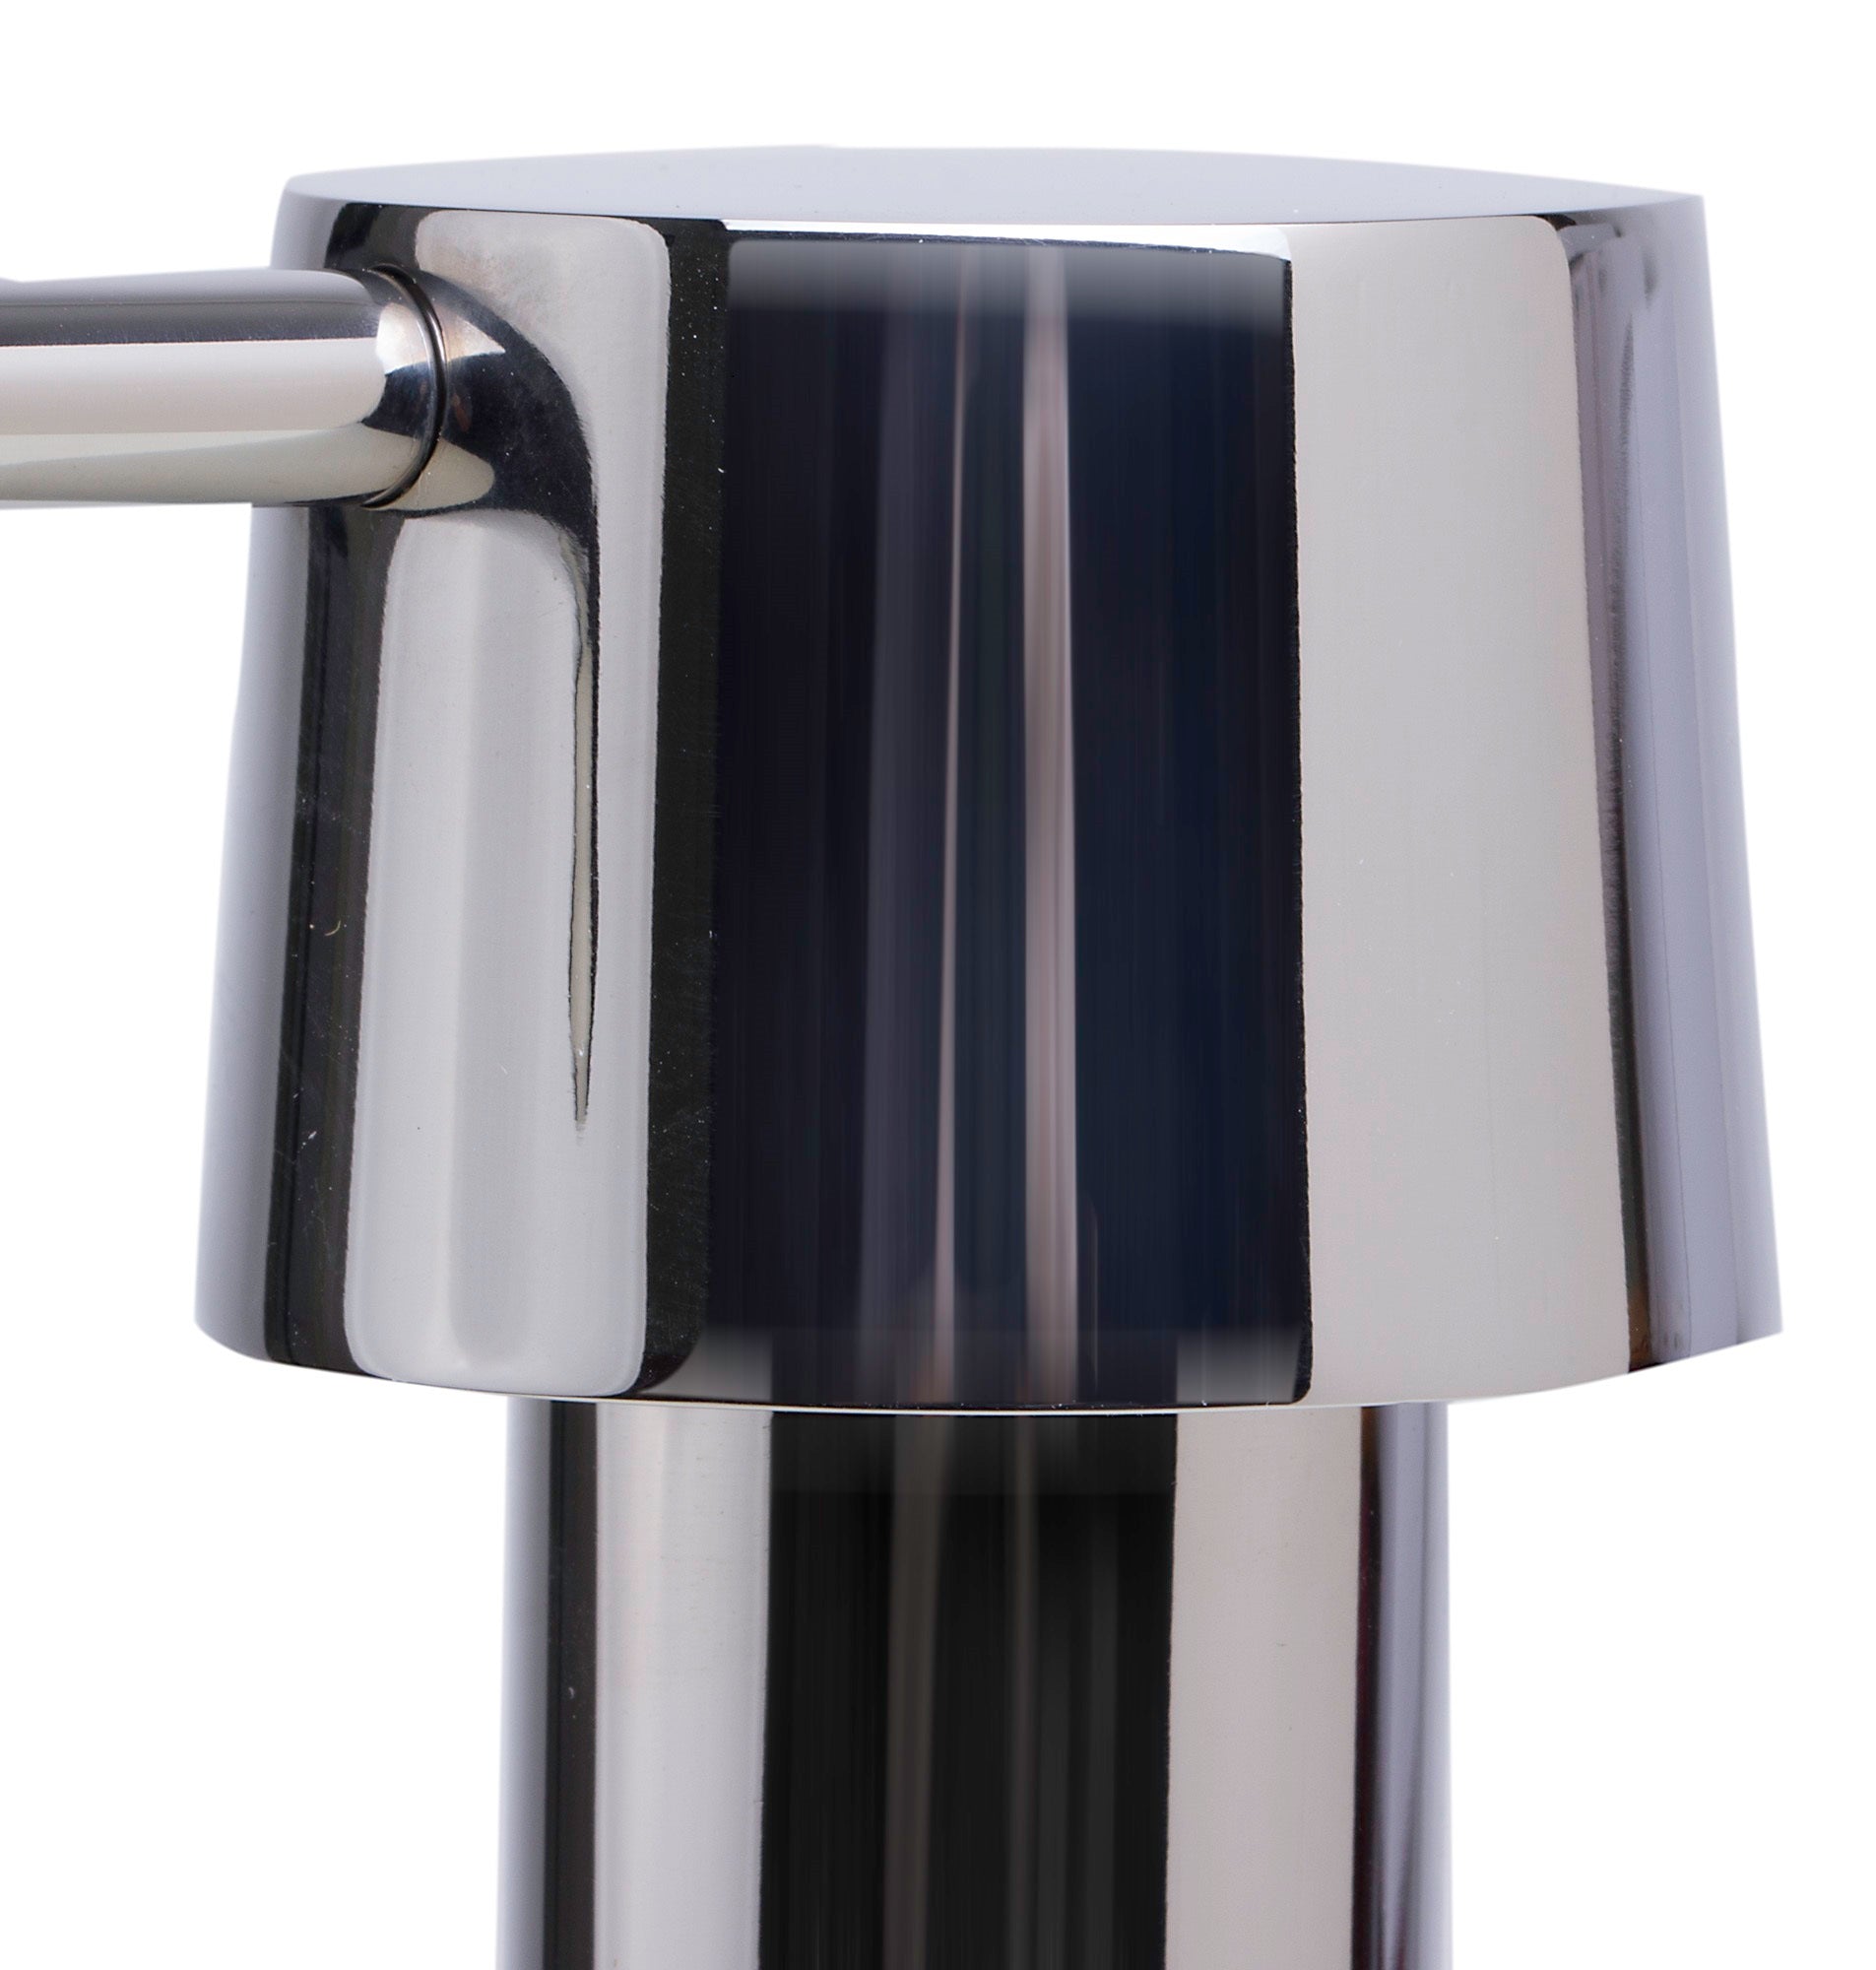 ALFI Brand - Solid Polished Stainless Steel Modern Soap Dispenser | AB5004-PSS